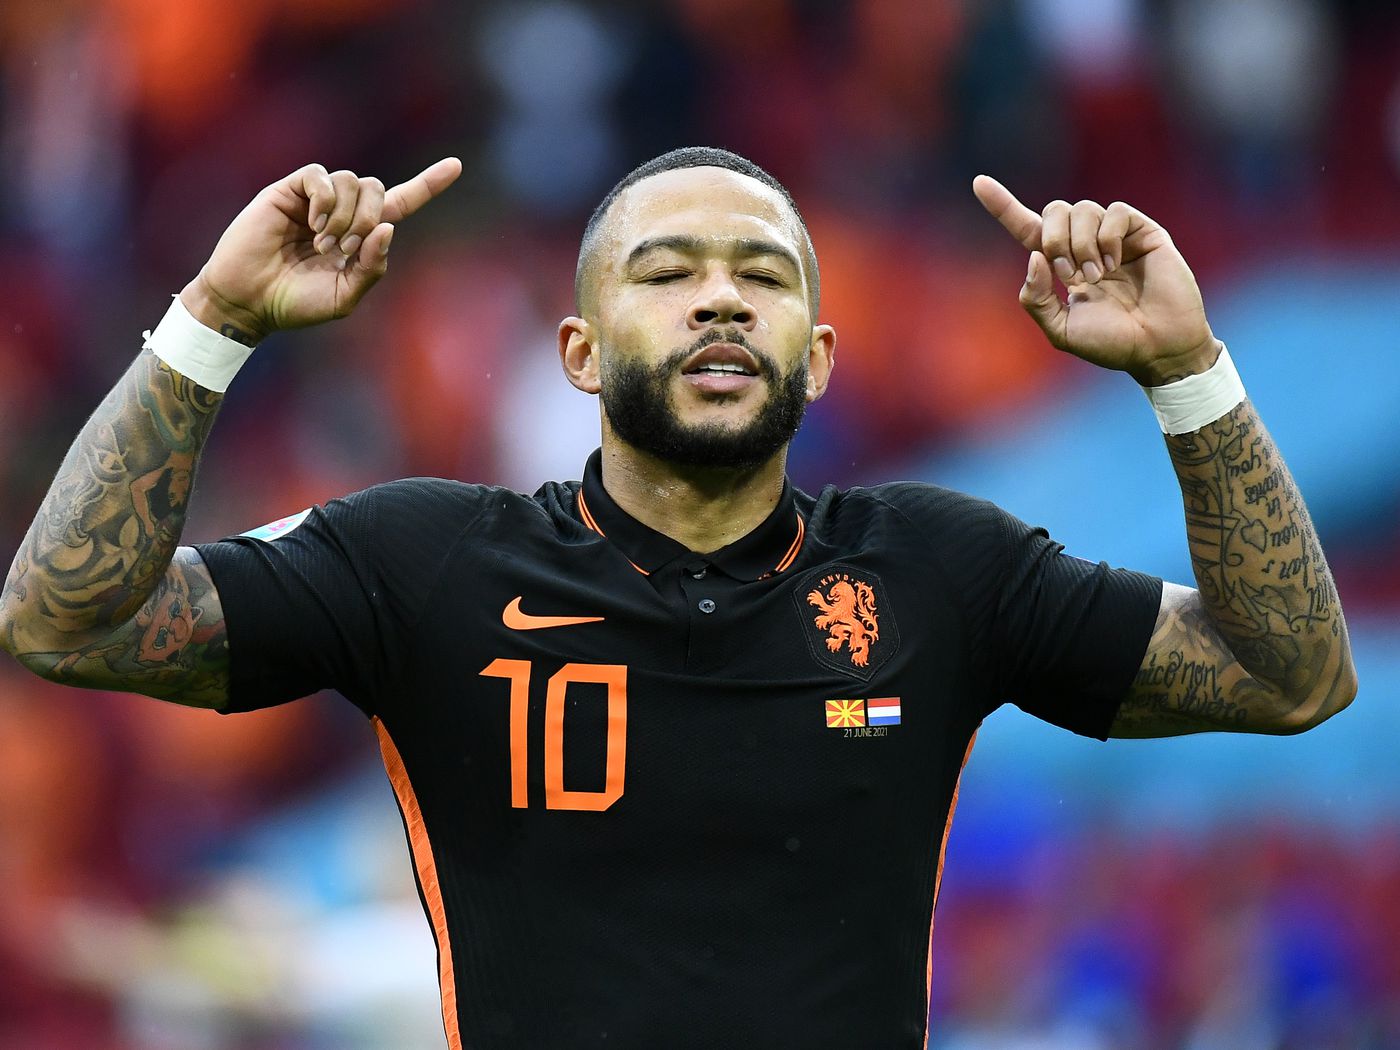 Memphis Depay on target in comfortable Netherlands win at Euro 2020